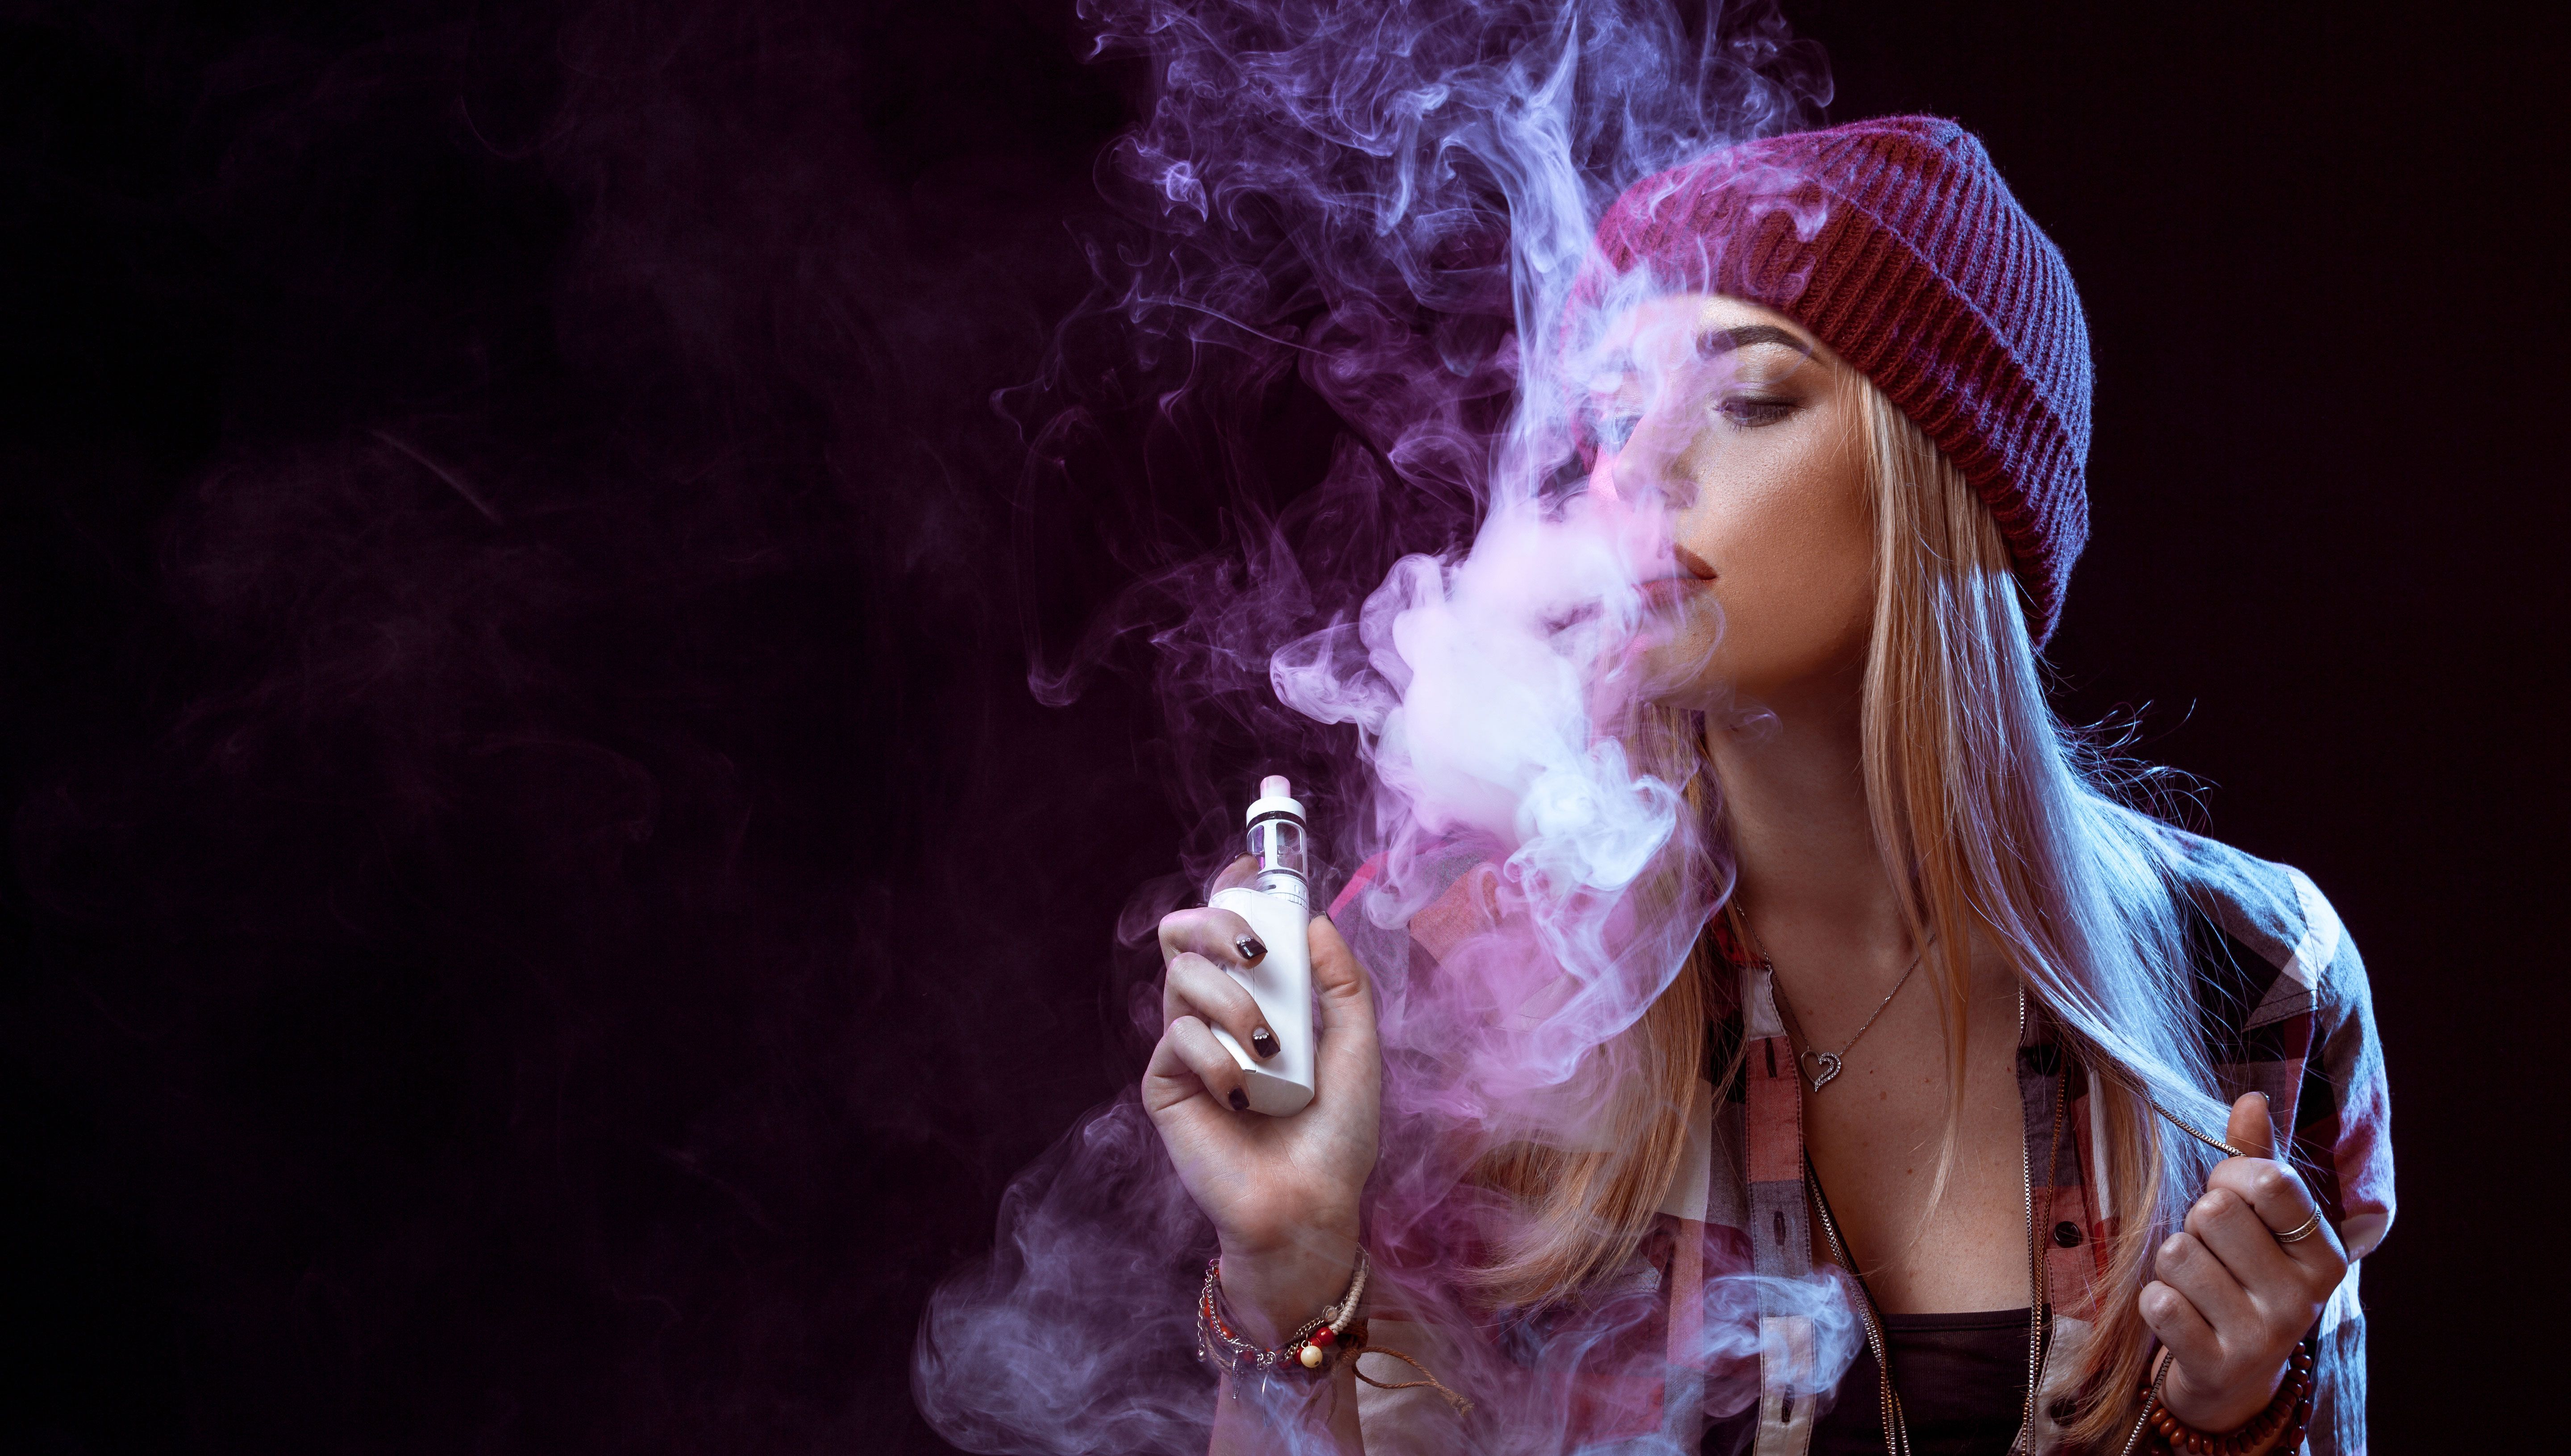 The number of US teens who vaped more than doubled in the last year